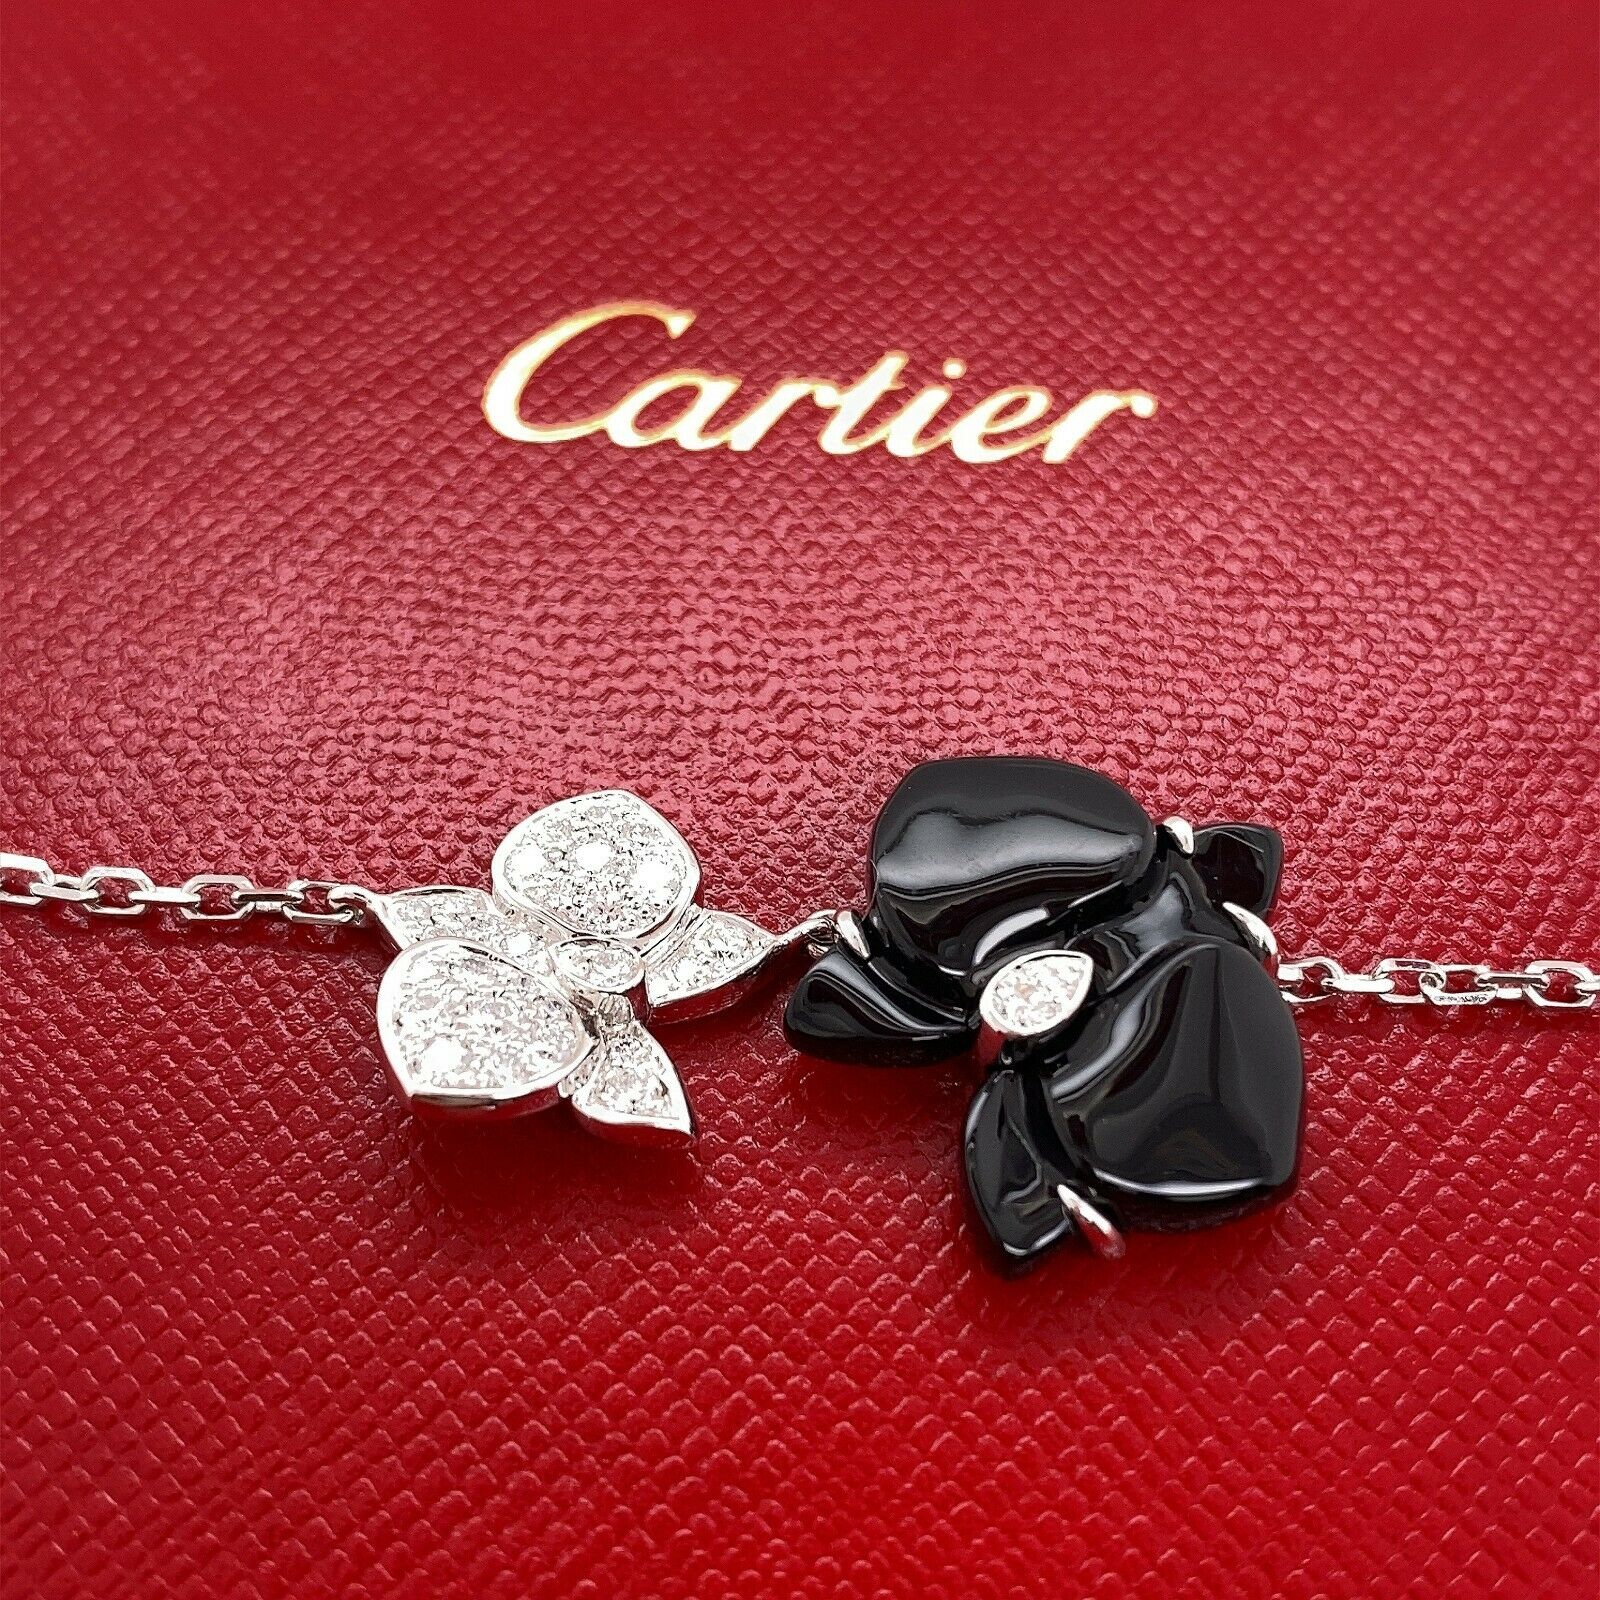 Cartier's Panthère and Van Cleef & Arpels's Alhambra – An Iconic Duo |  Centurion Magazine